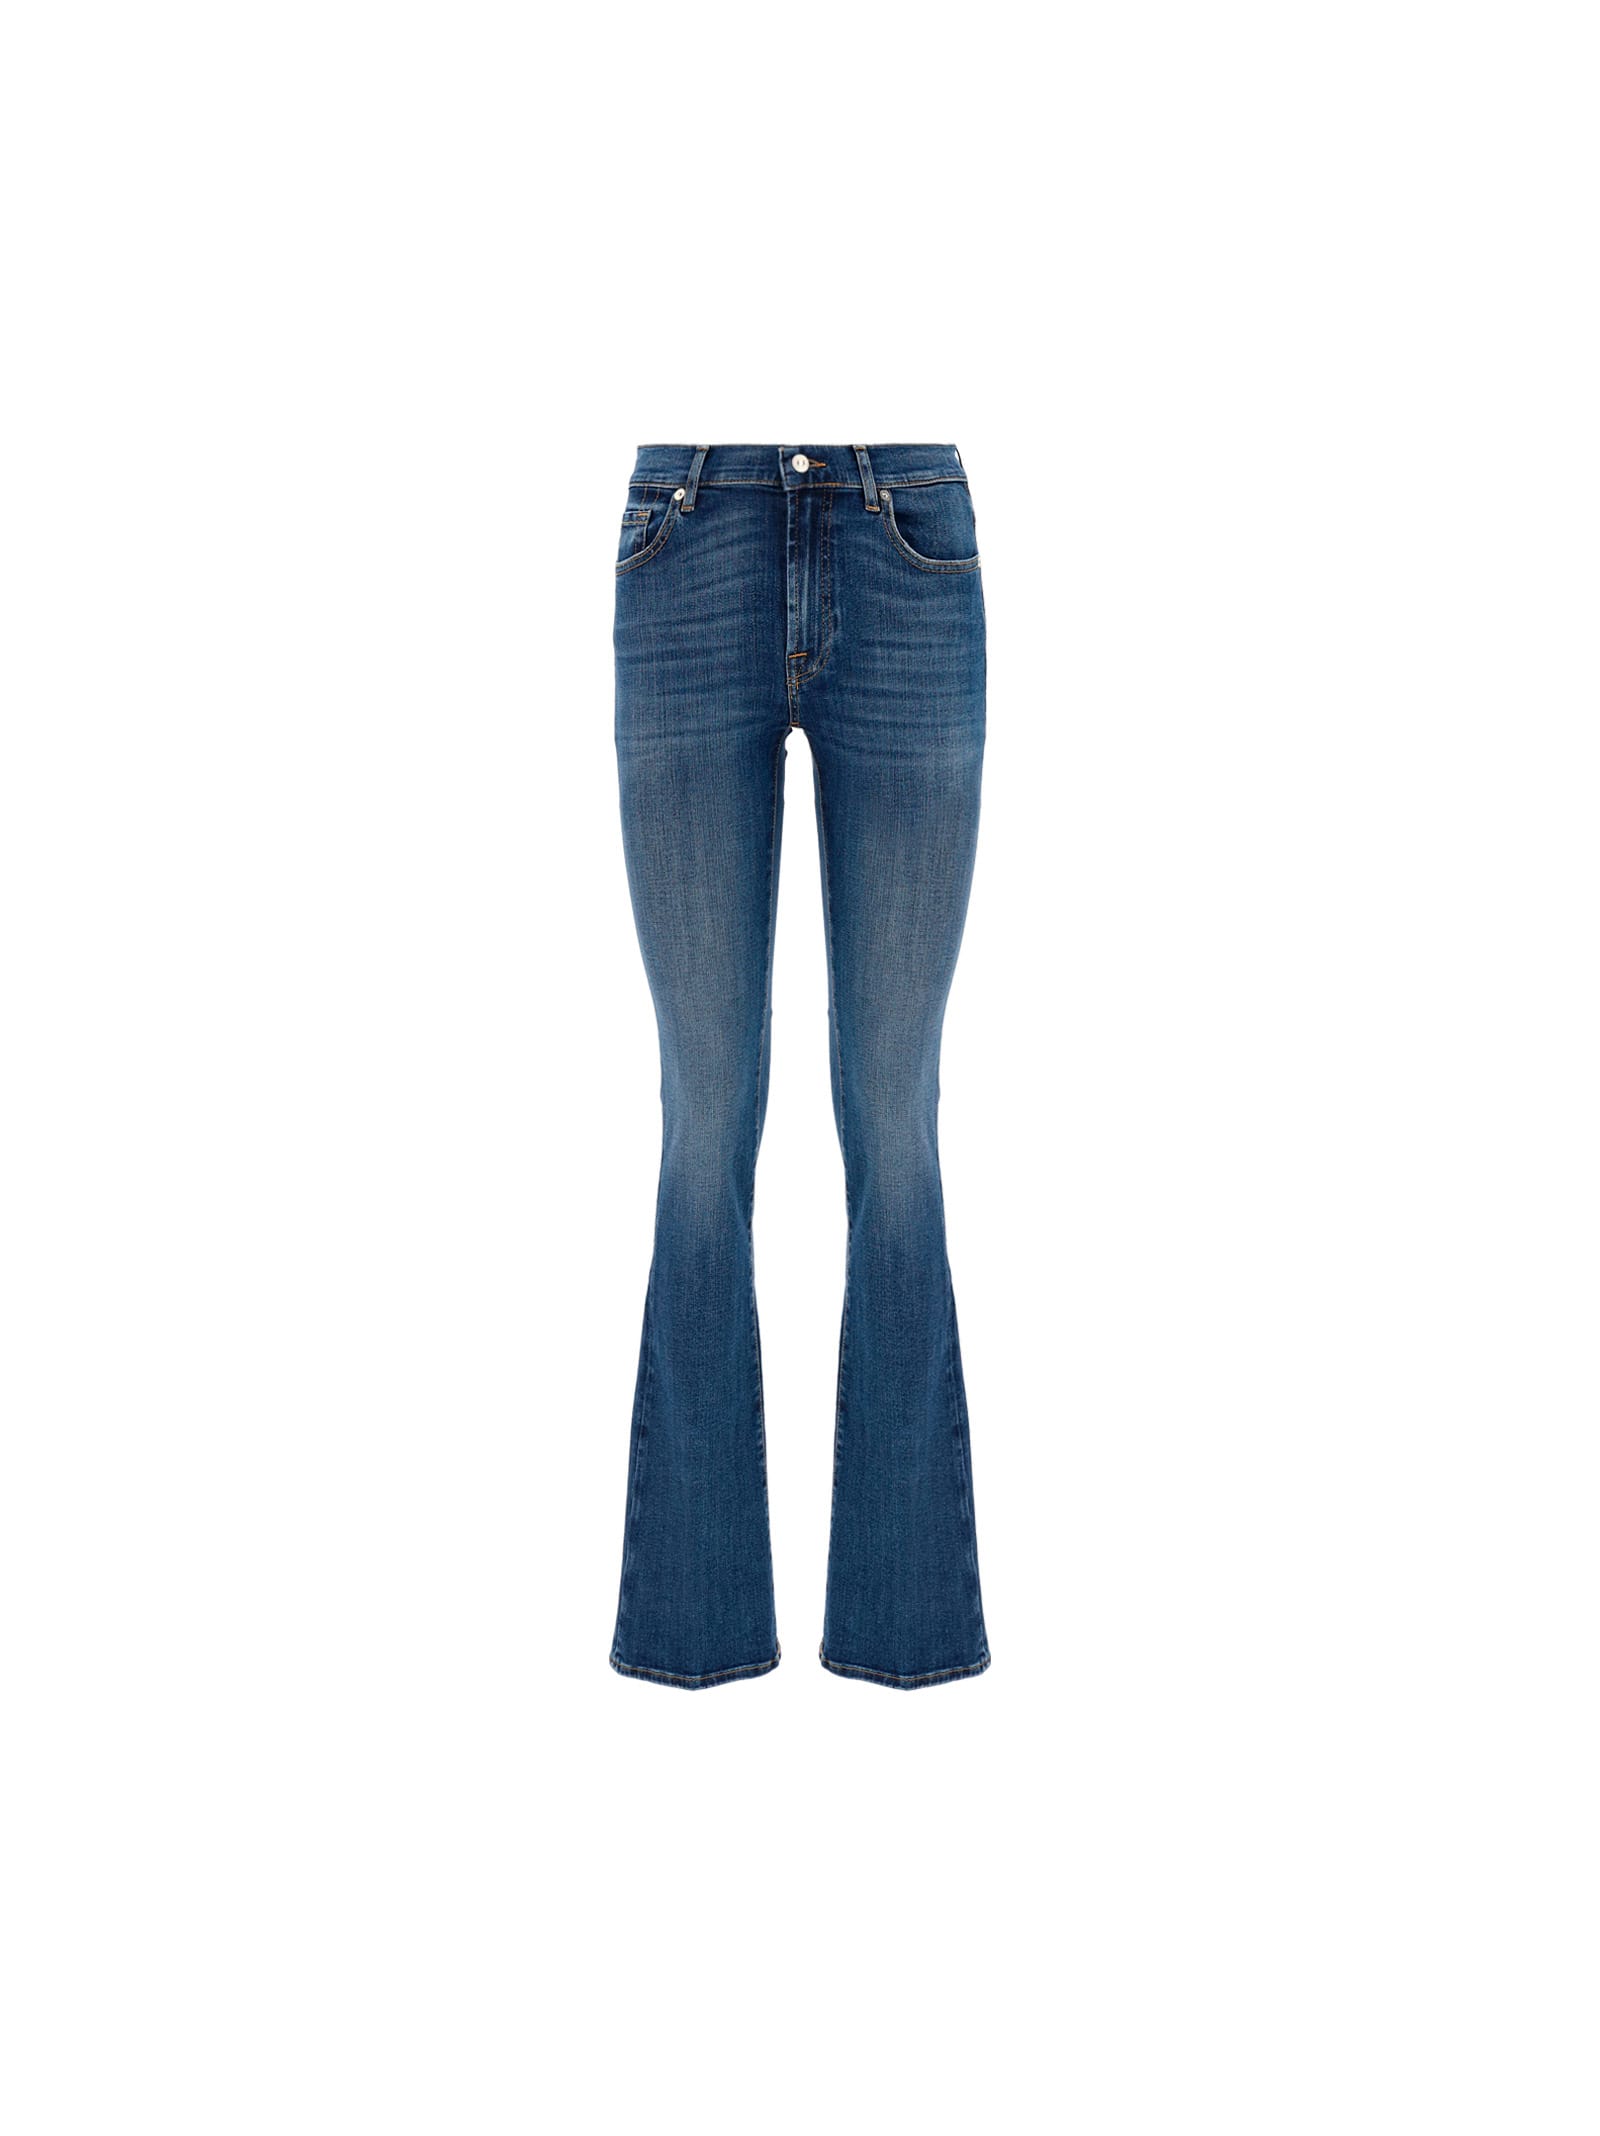 7 FOR ALL MANKIND SOHO JEANS